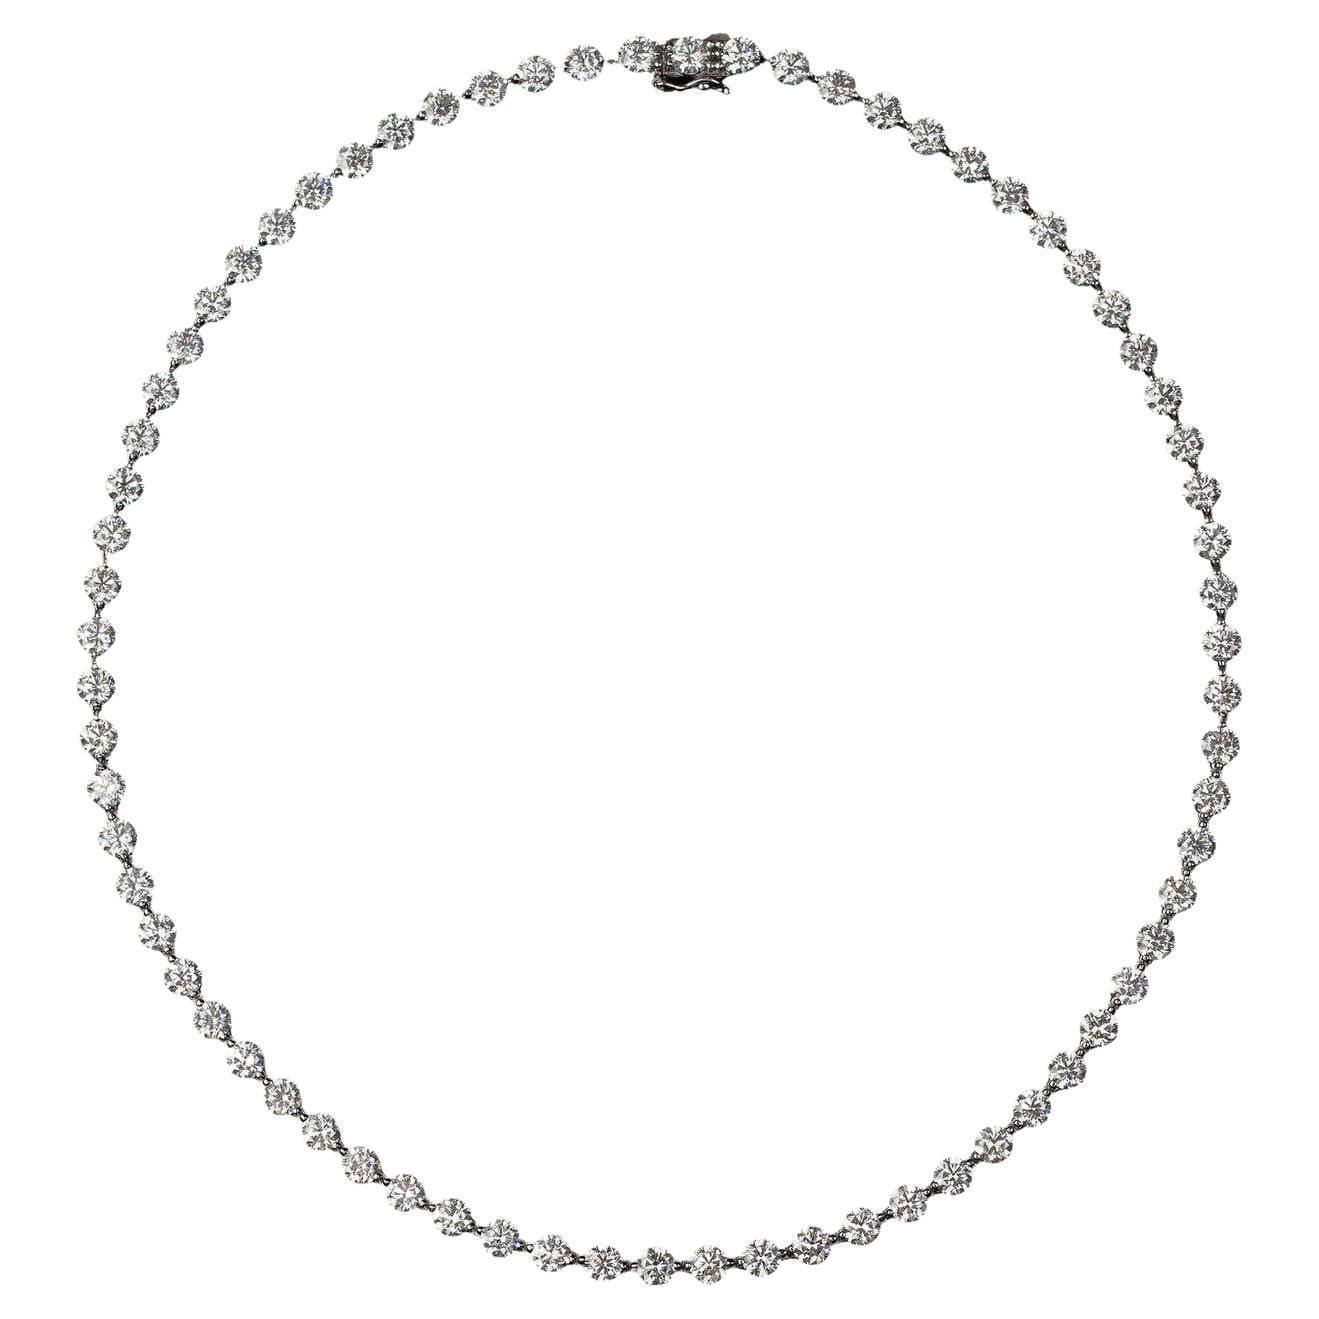 GIA CERTIFIED 
Diamond tennis Necklace 
And incredible sophisticated take on the classic diamond straight line tennis necklace.
Say goodbye to the frustrating turning and twisting of your diamond necklace. 
This patented handmade 18karat white gold